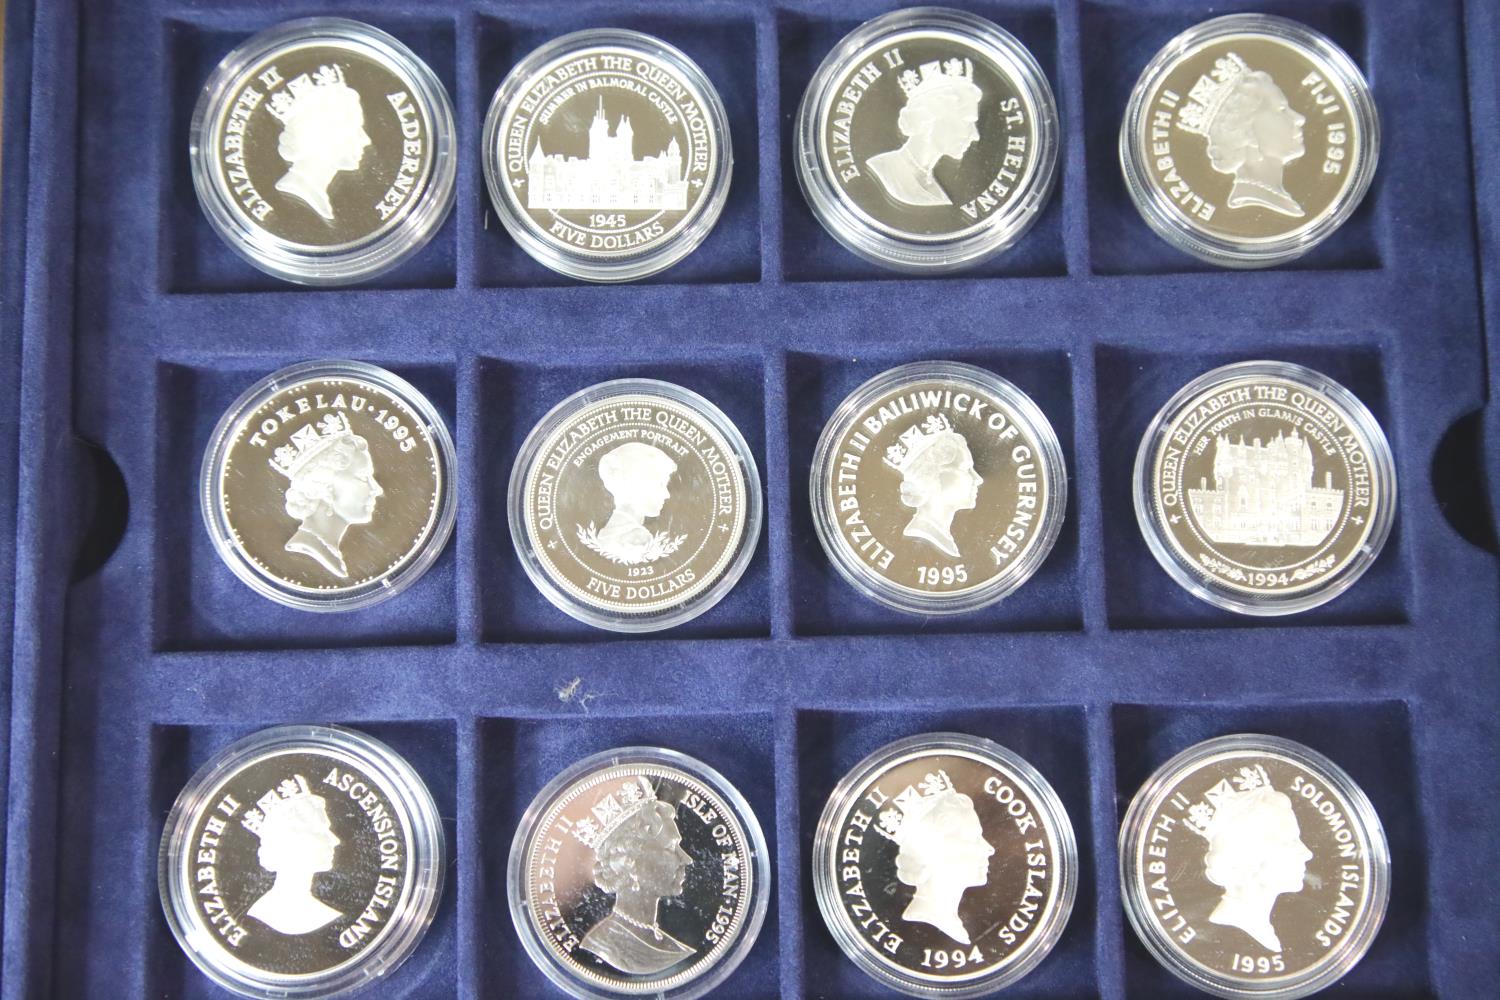 Twenty-four 1oz silver proof commemorative coins. P&P Group 1 (£14+VAT for the first lot and £1+